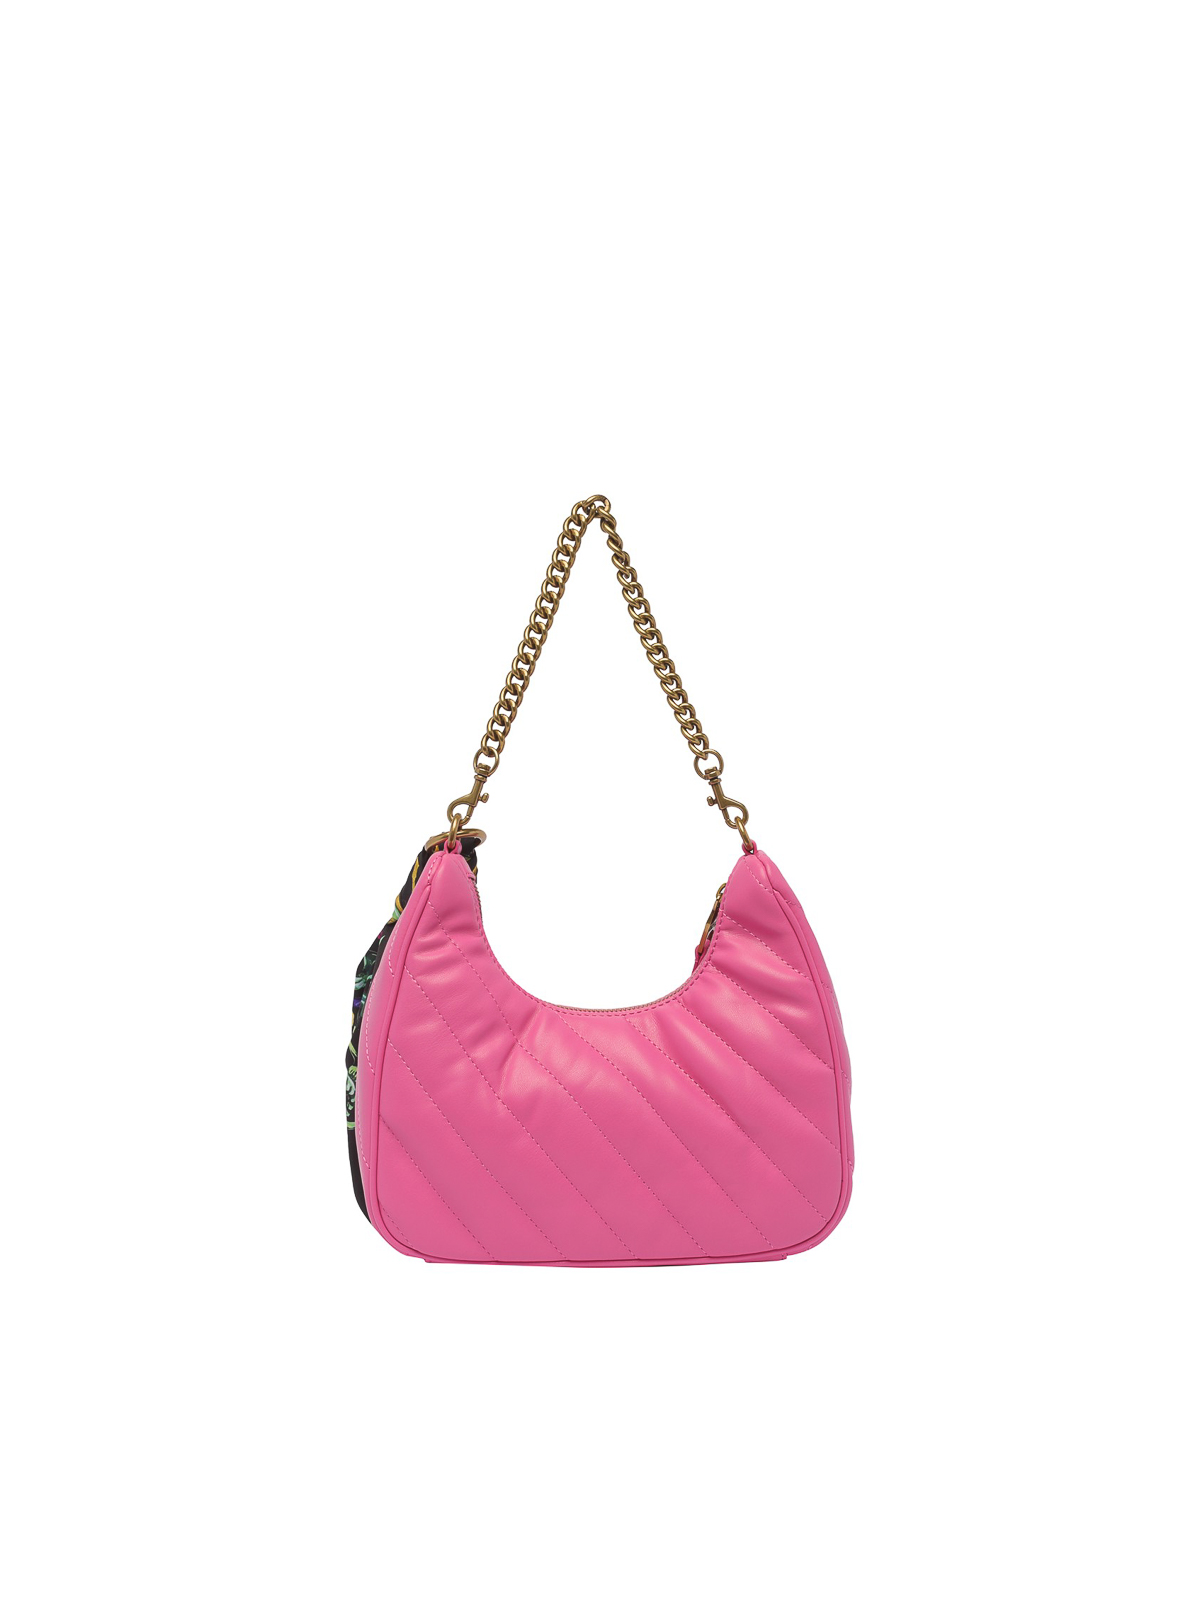 Sell Versace Jeans Couture Small Thelma Tote Bag - Pink